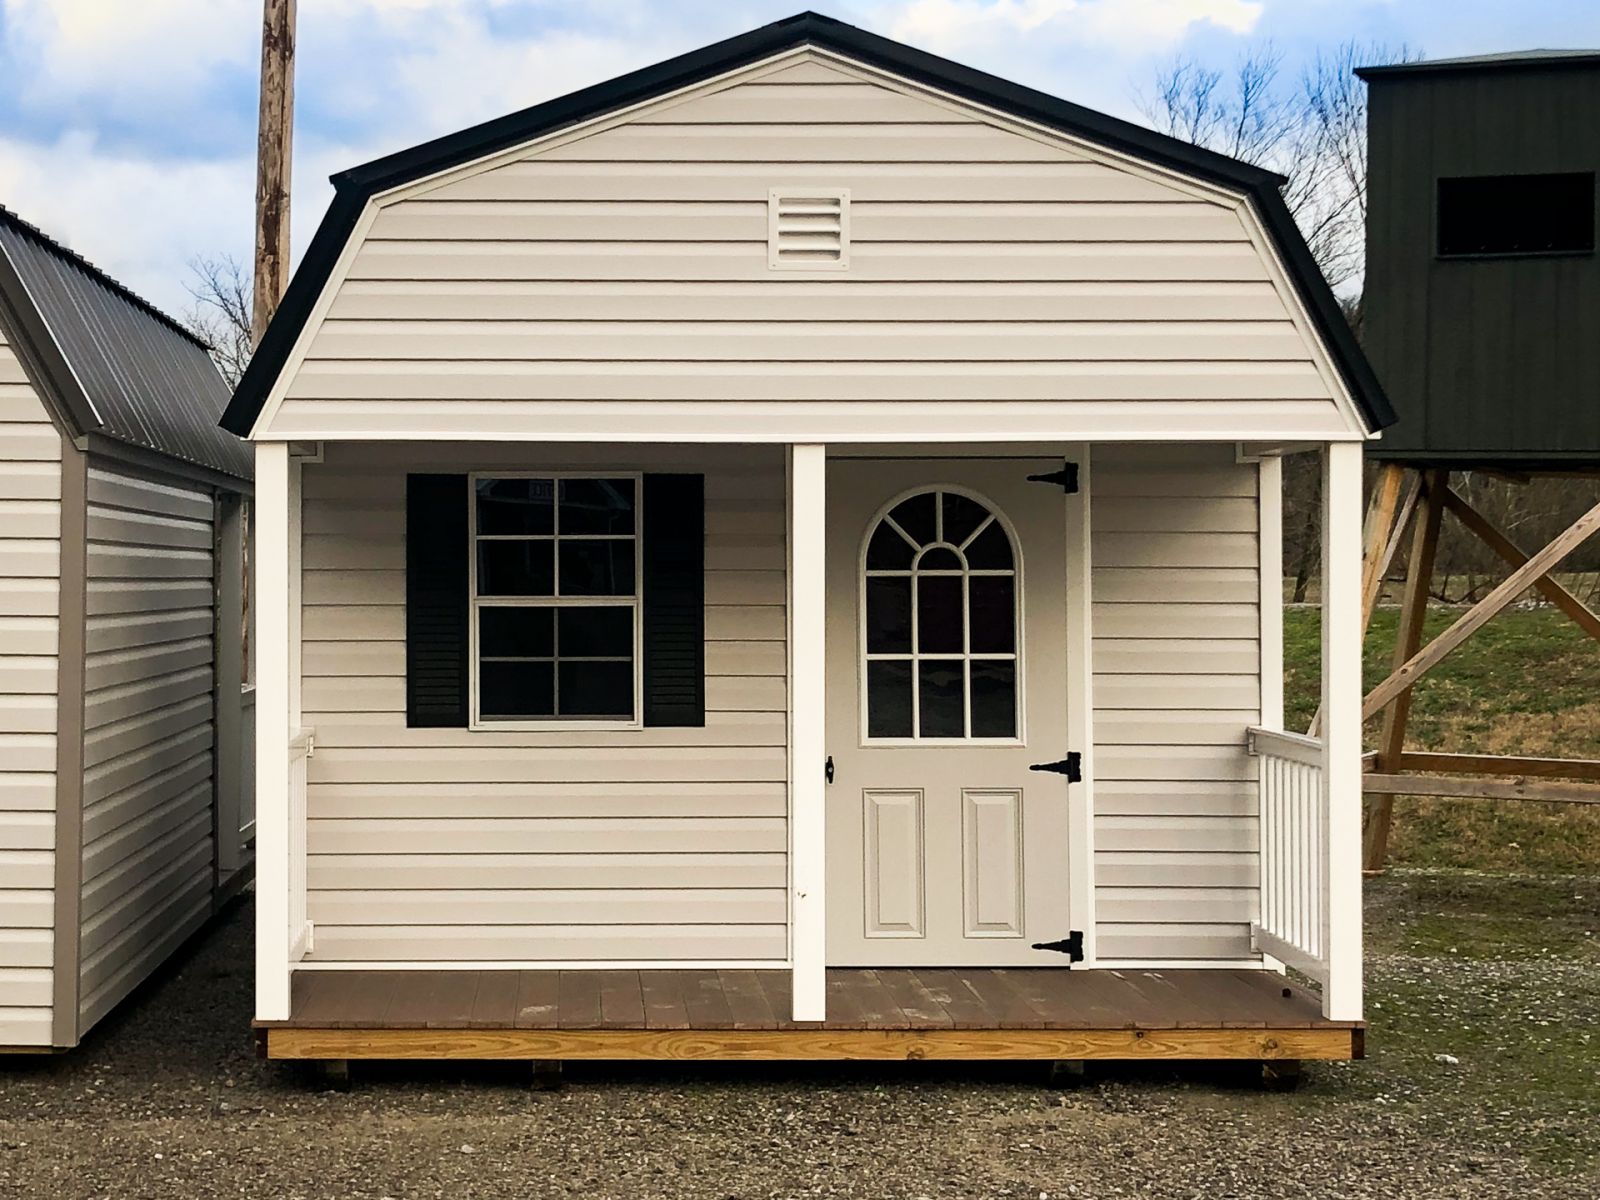 A prefab cabin for sale in Greensburg, KY